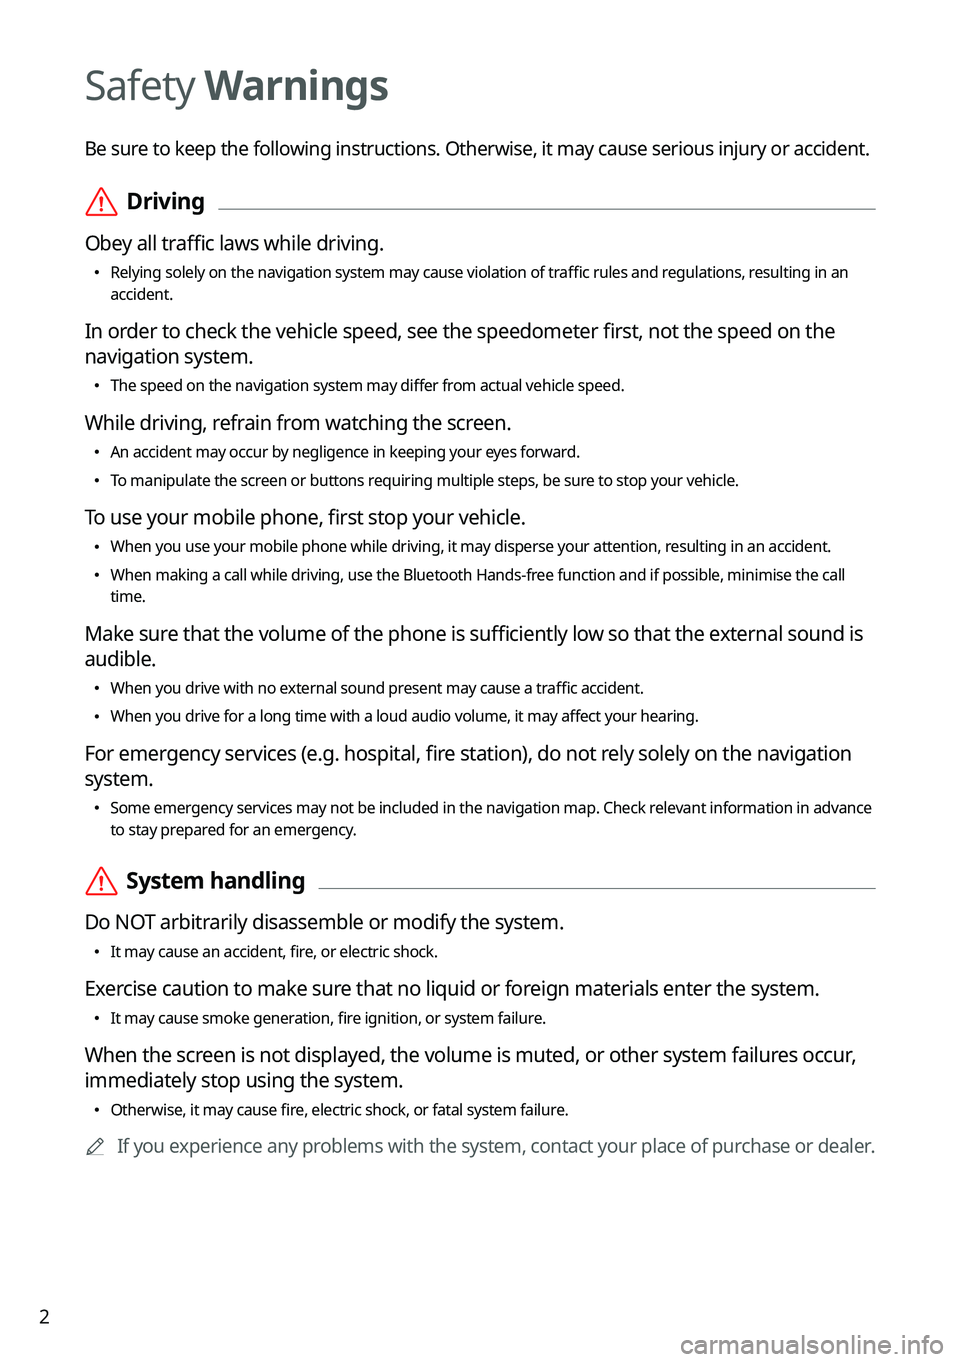 KIA SPORTAGE HYBRID 2023  Navigation System Quick Reference Guide 2
Safety Warnings
Be sure to keep the following instructions. Otherwise, it may cause serious injury or accident.
 ÝDriving
Obey all traffic laws while driving.
 •
Relying solely on the navigation 